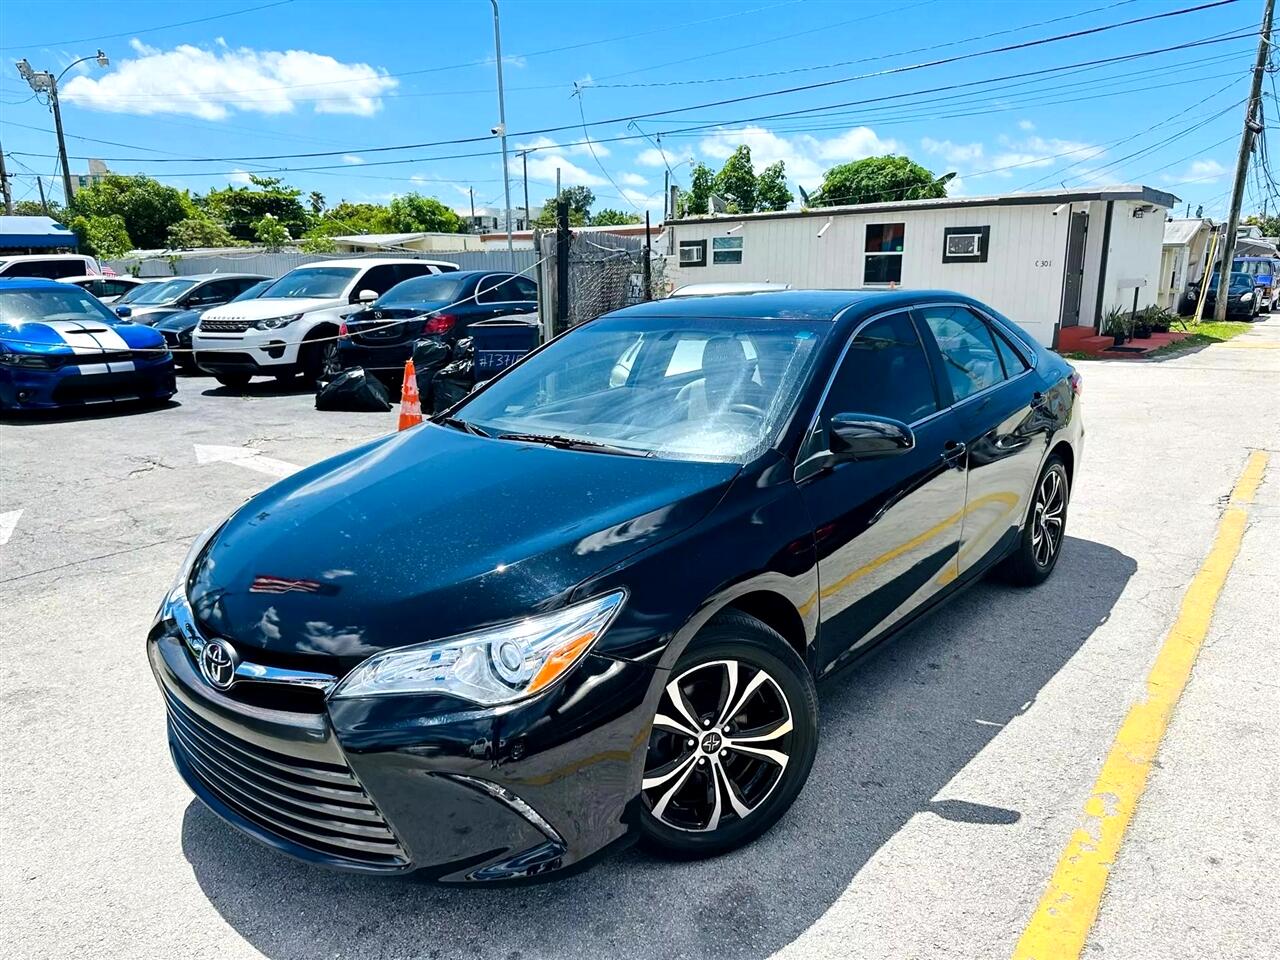 2015 Toyota Camry 4dr Sdn I4 Auto XLE (Natl)